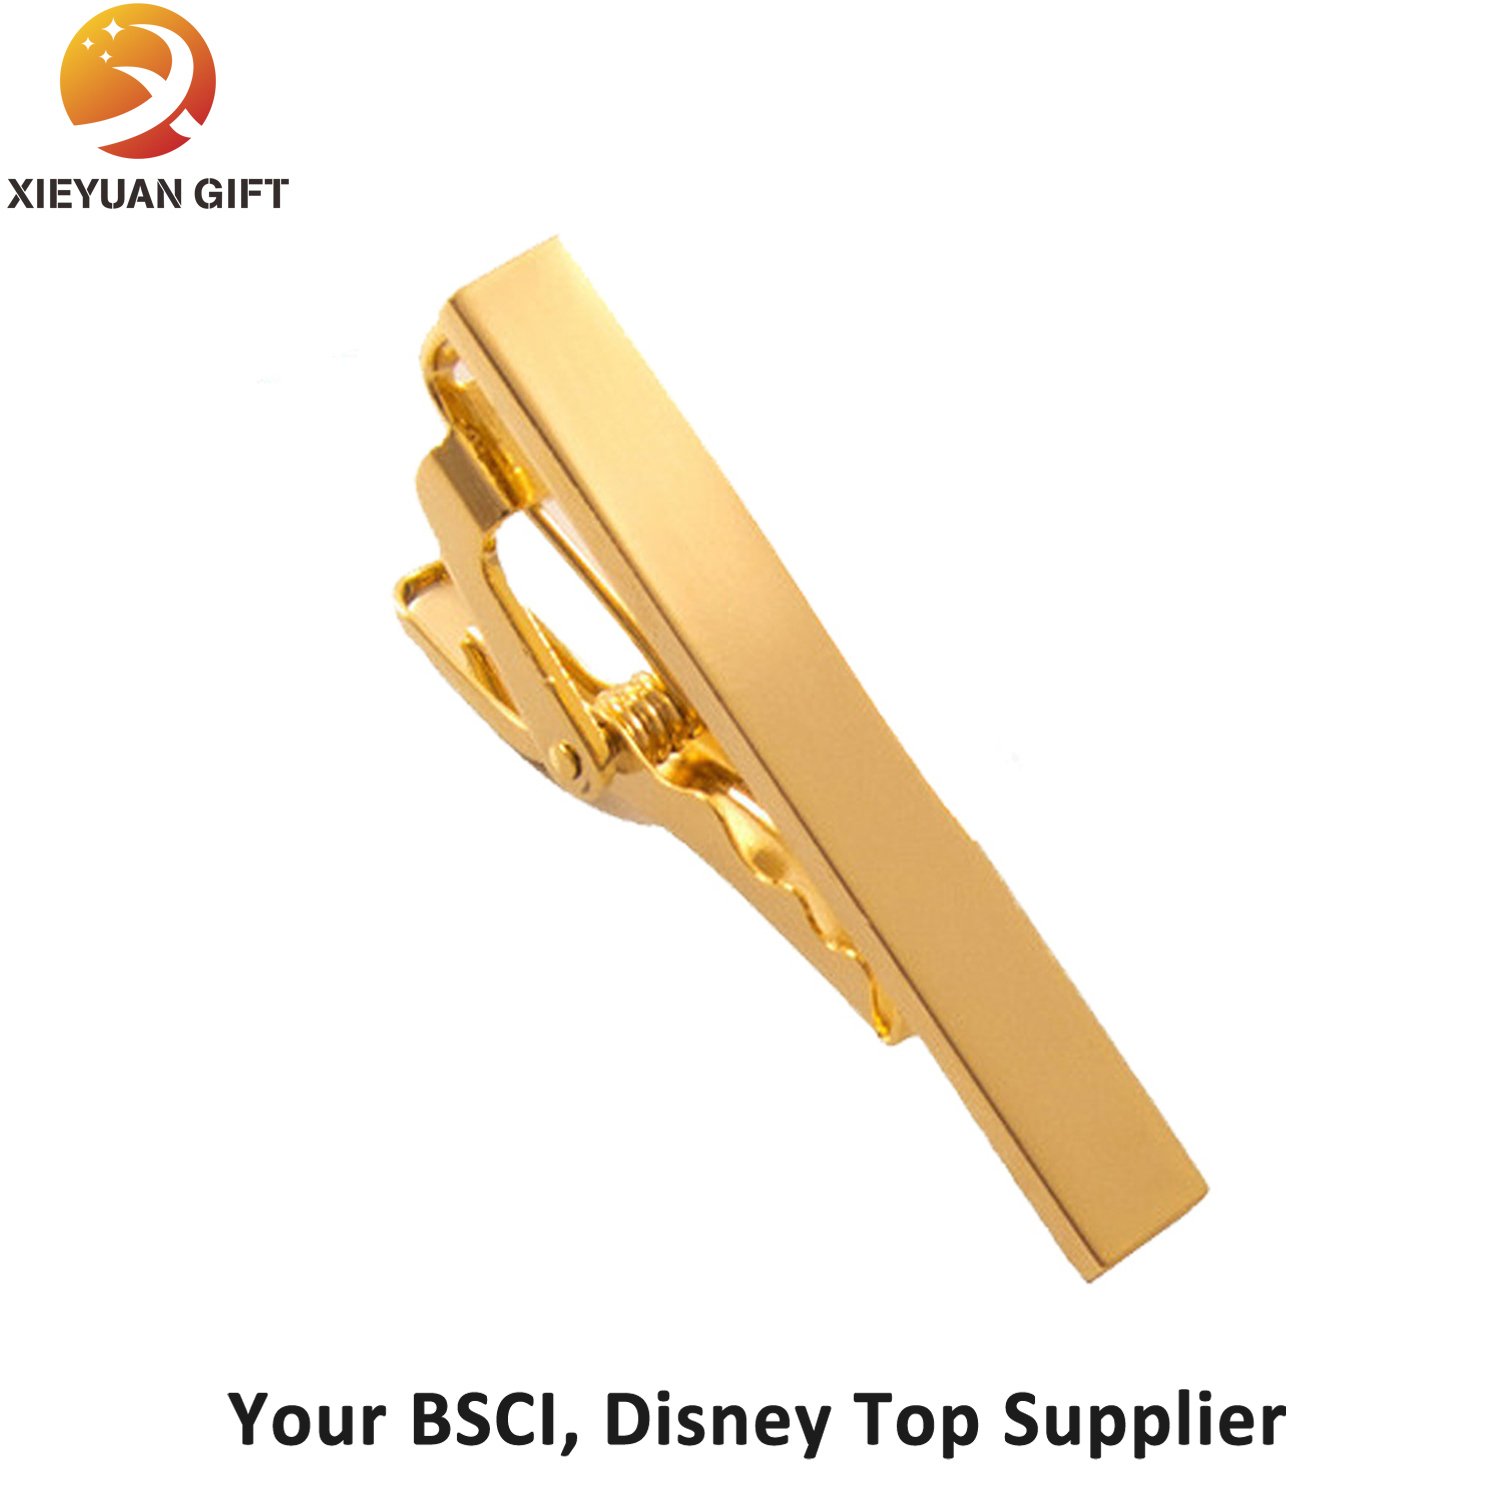 Gold Plating Tie Clip with Chain for Sale